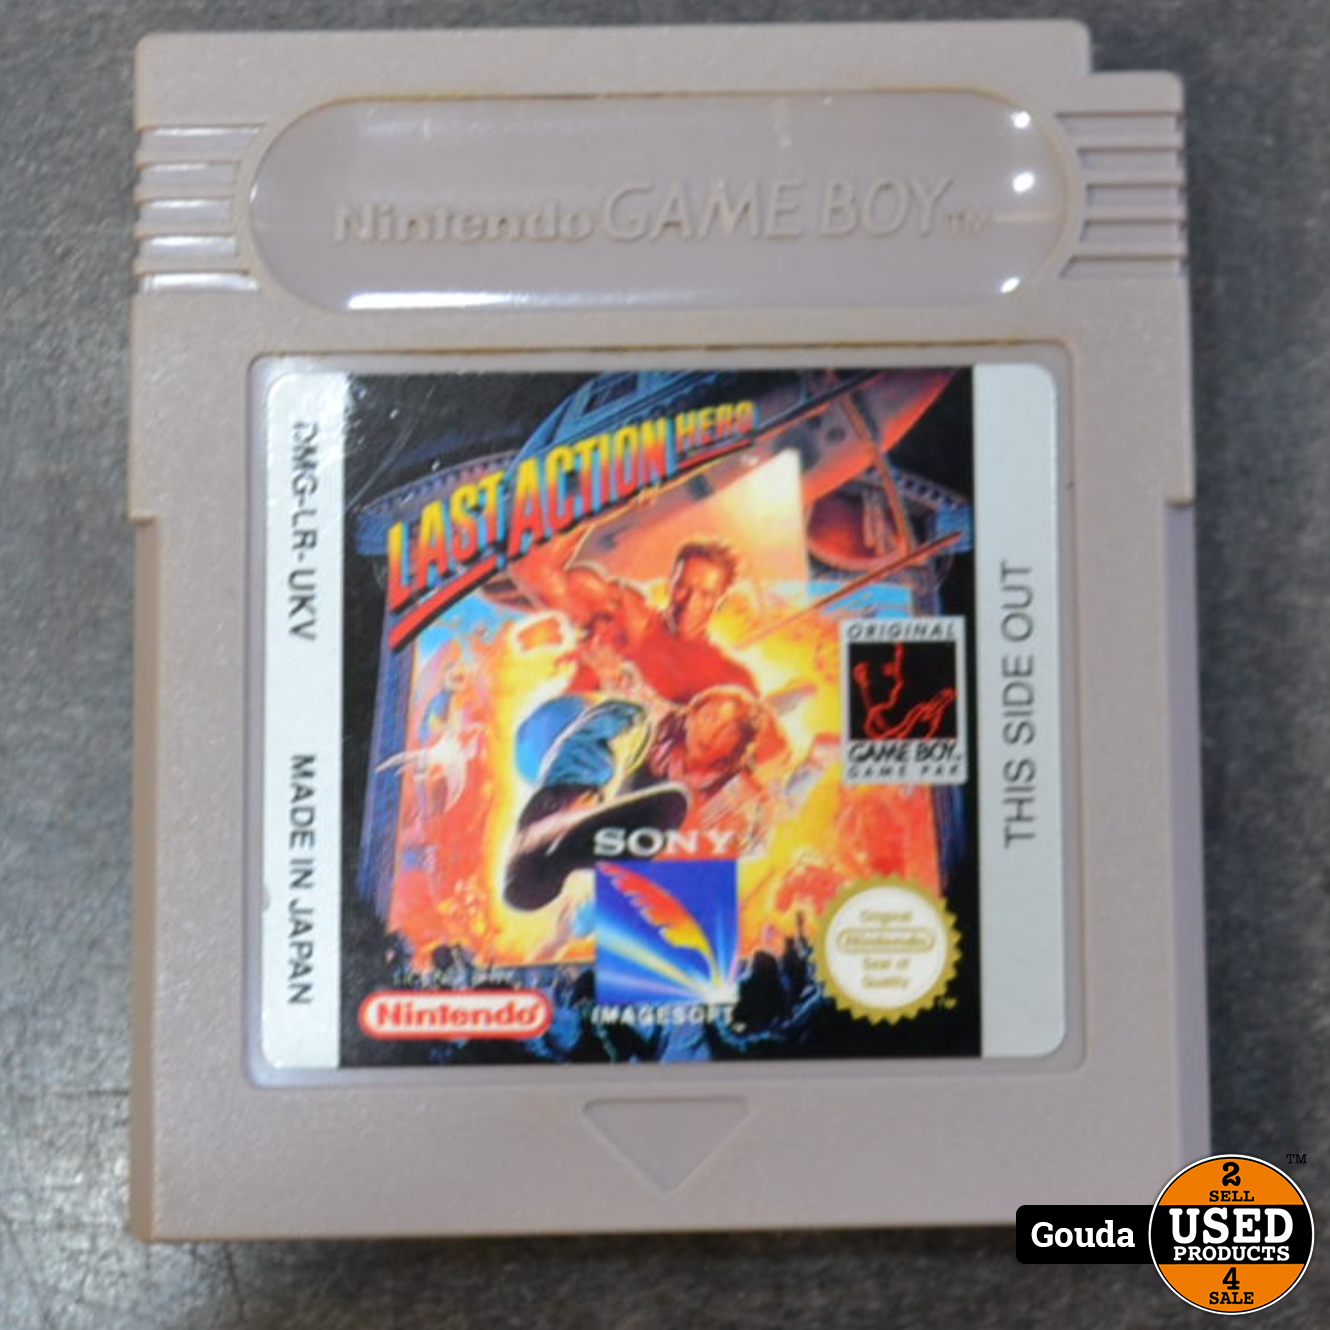 Effectief Lach stok Gameboy game Last action hero - Used Products Gouda